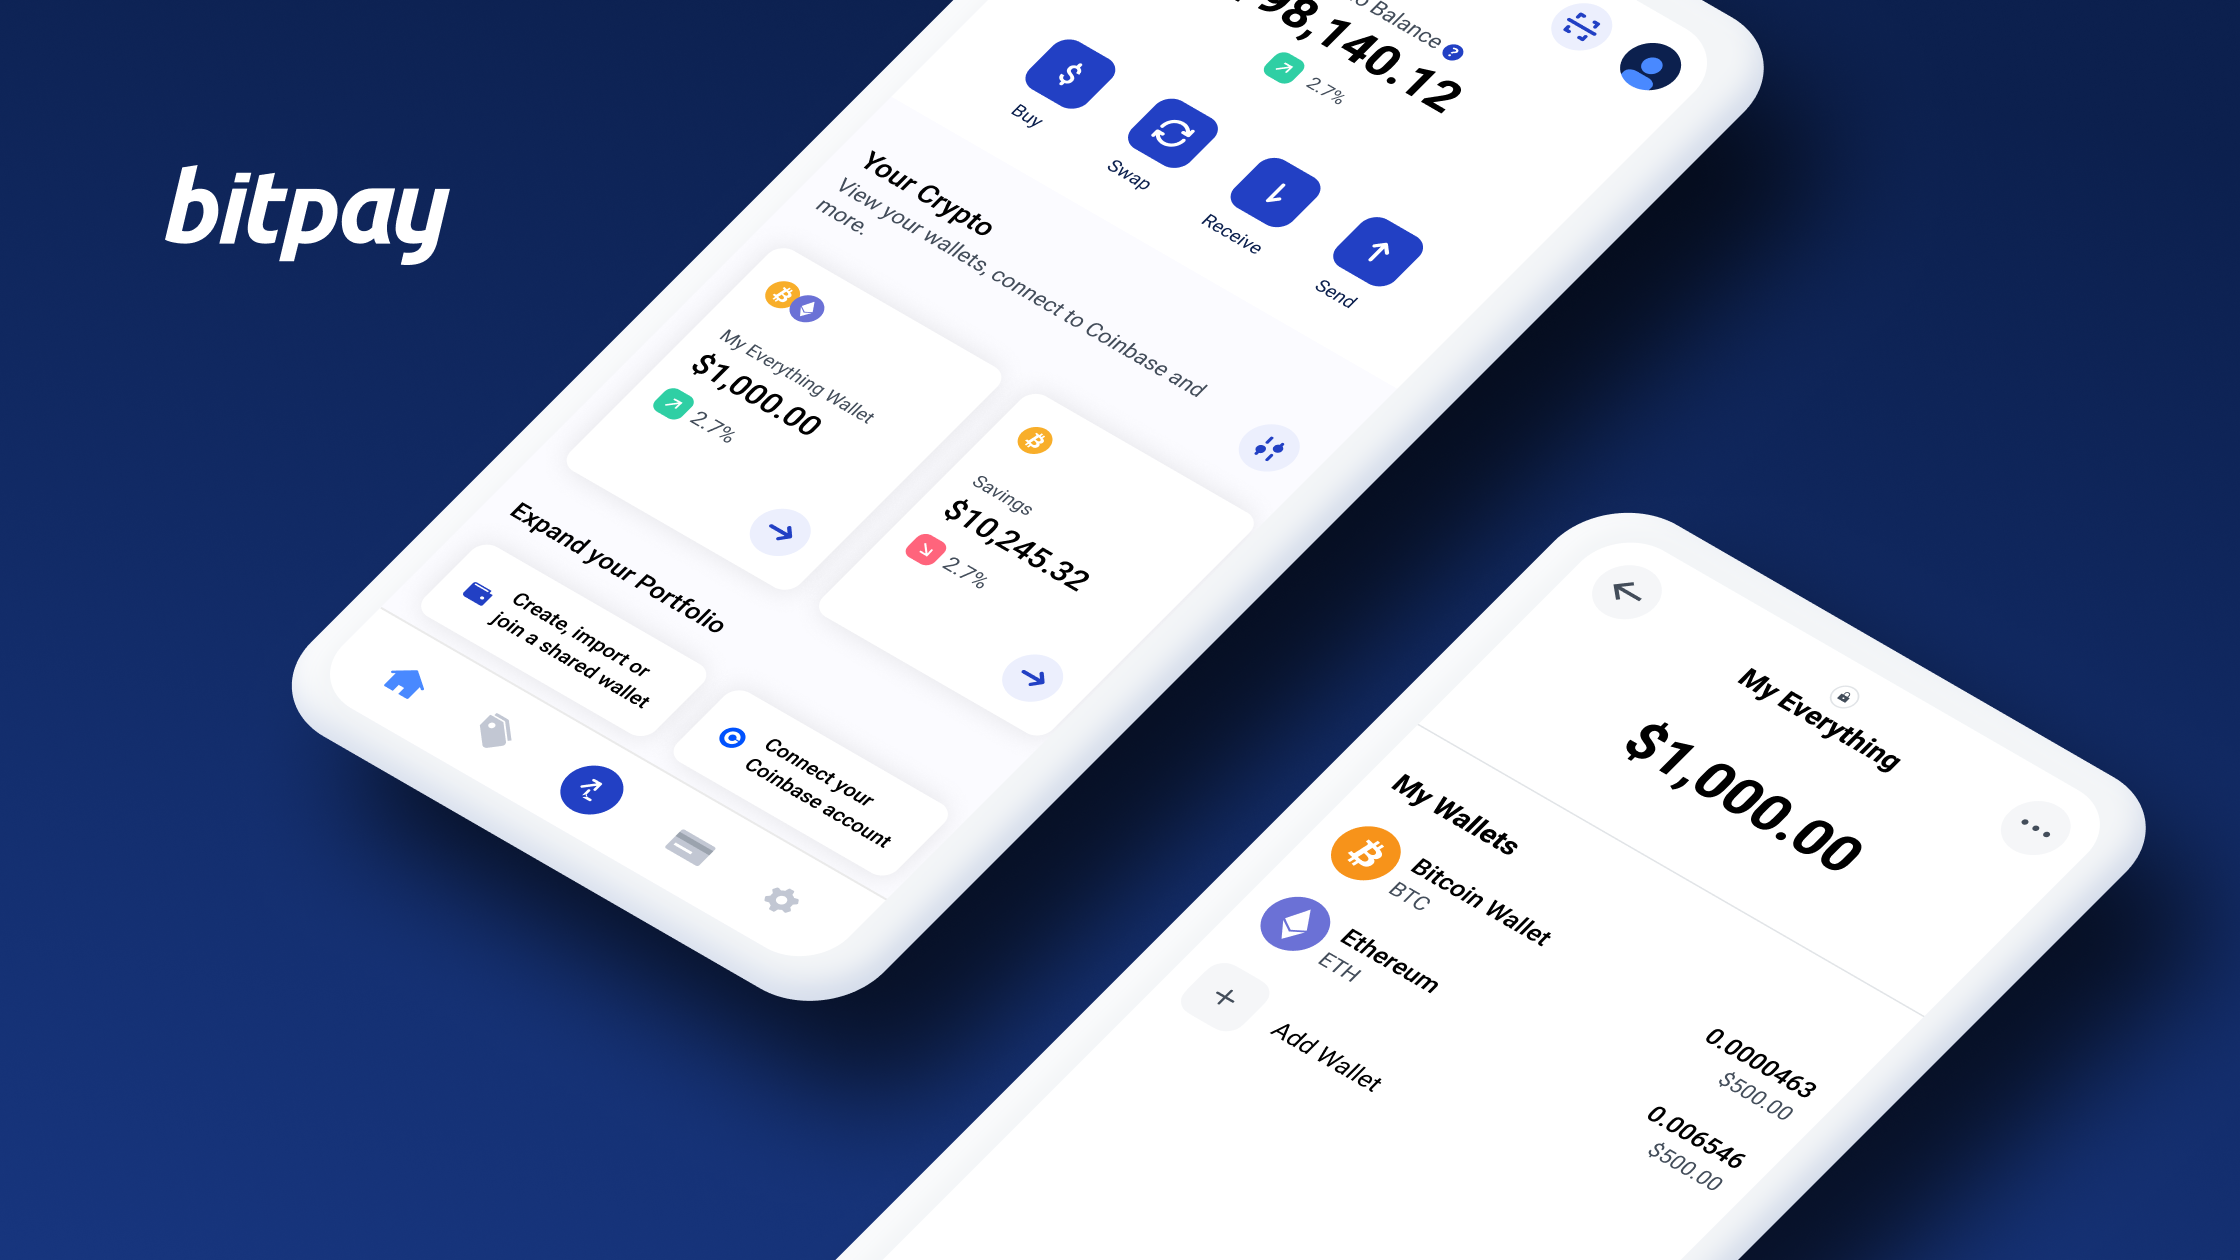 Mobile Crypto Wallets Offer Convenience and Security in One App - Here's How to Choose the Right One